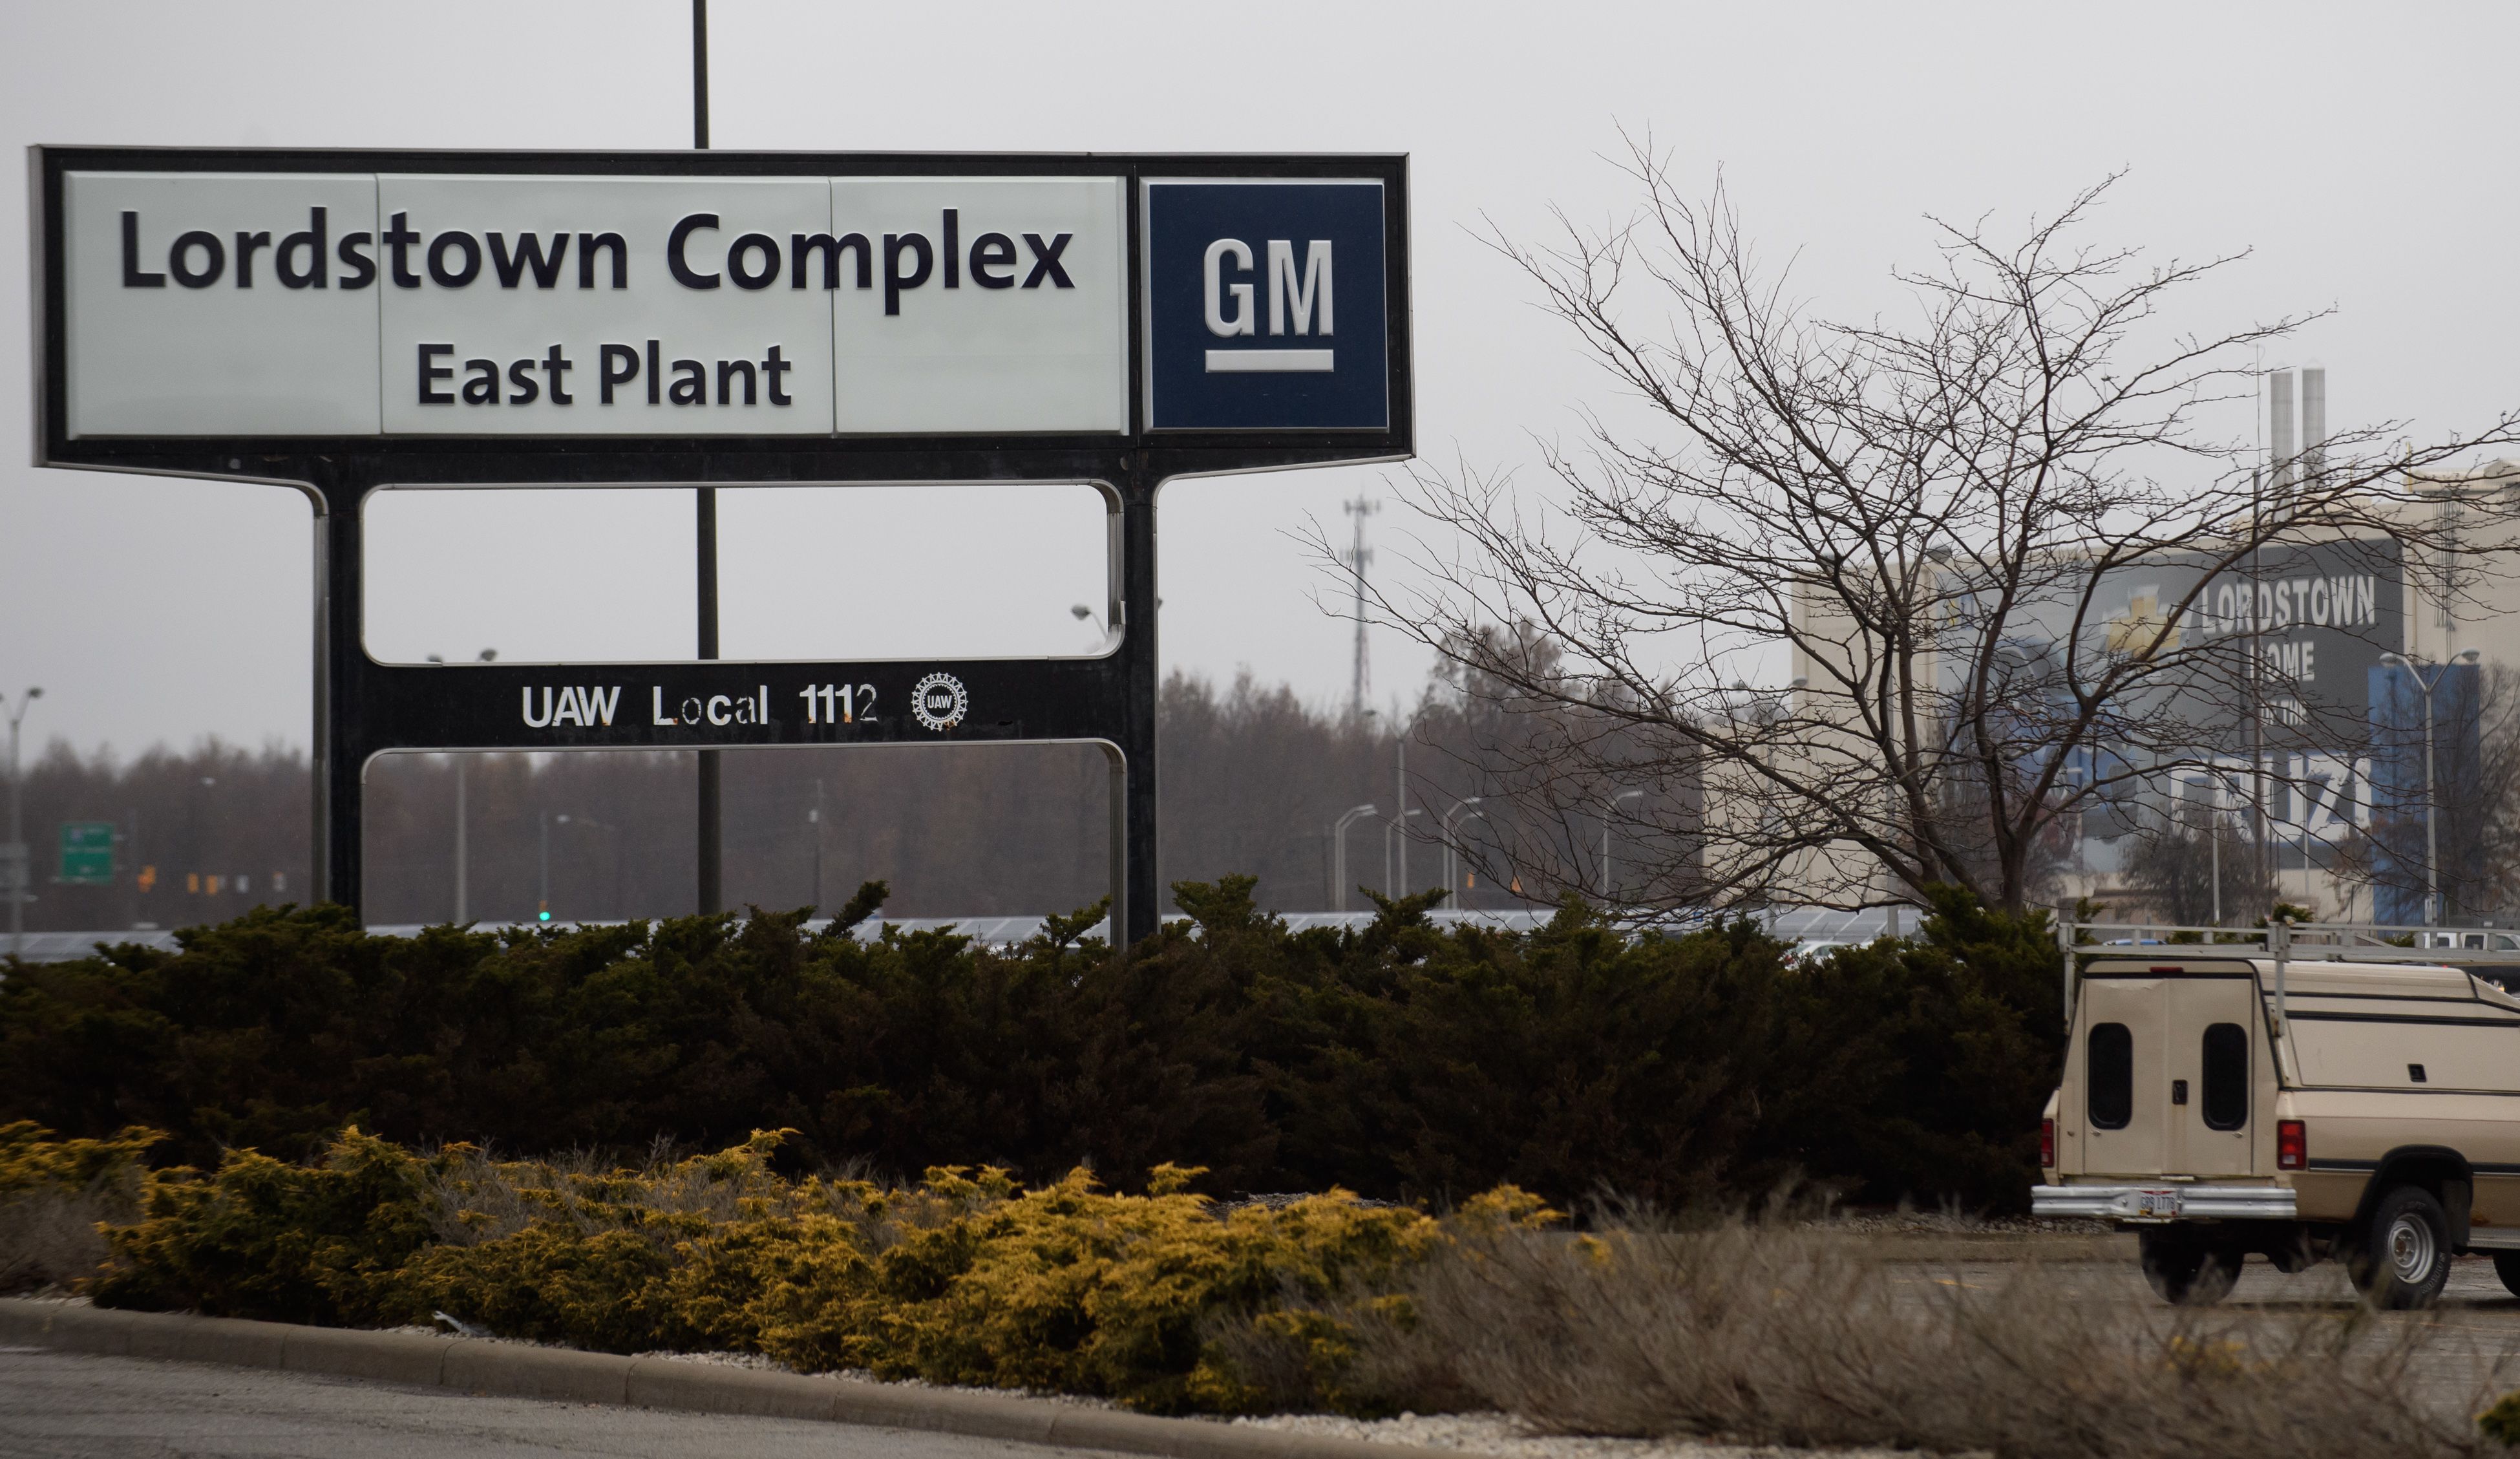 Trump says GM will sell Lordstown, Ohio plant to Workhorse for electric truck production